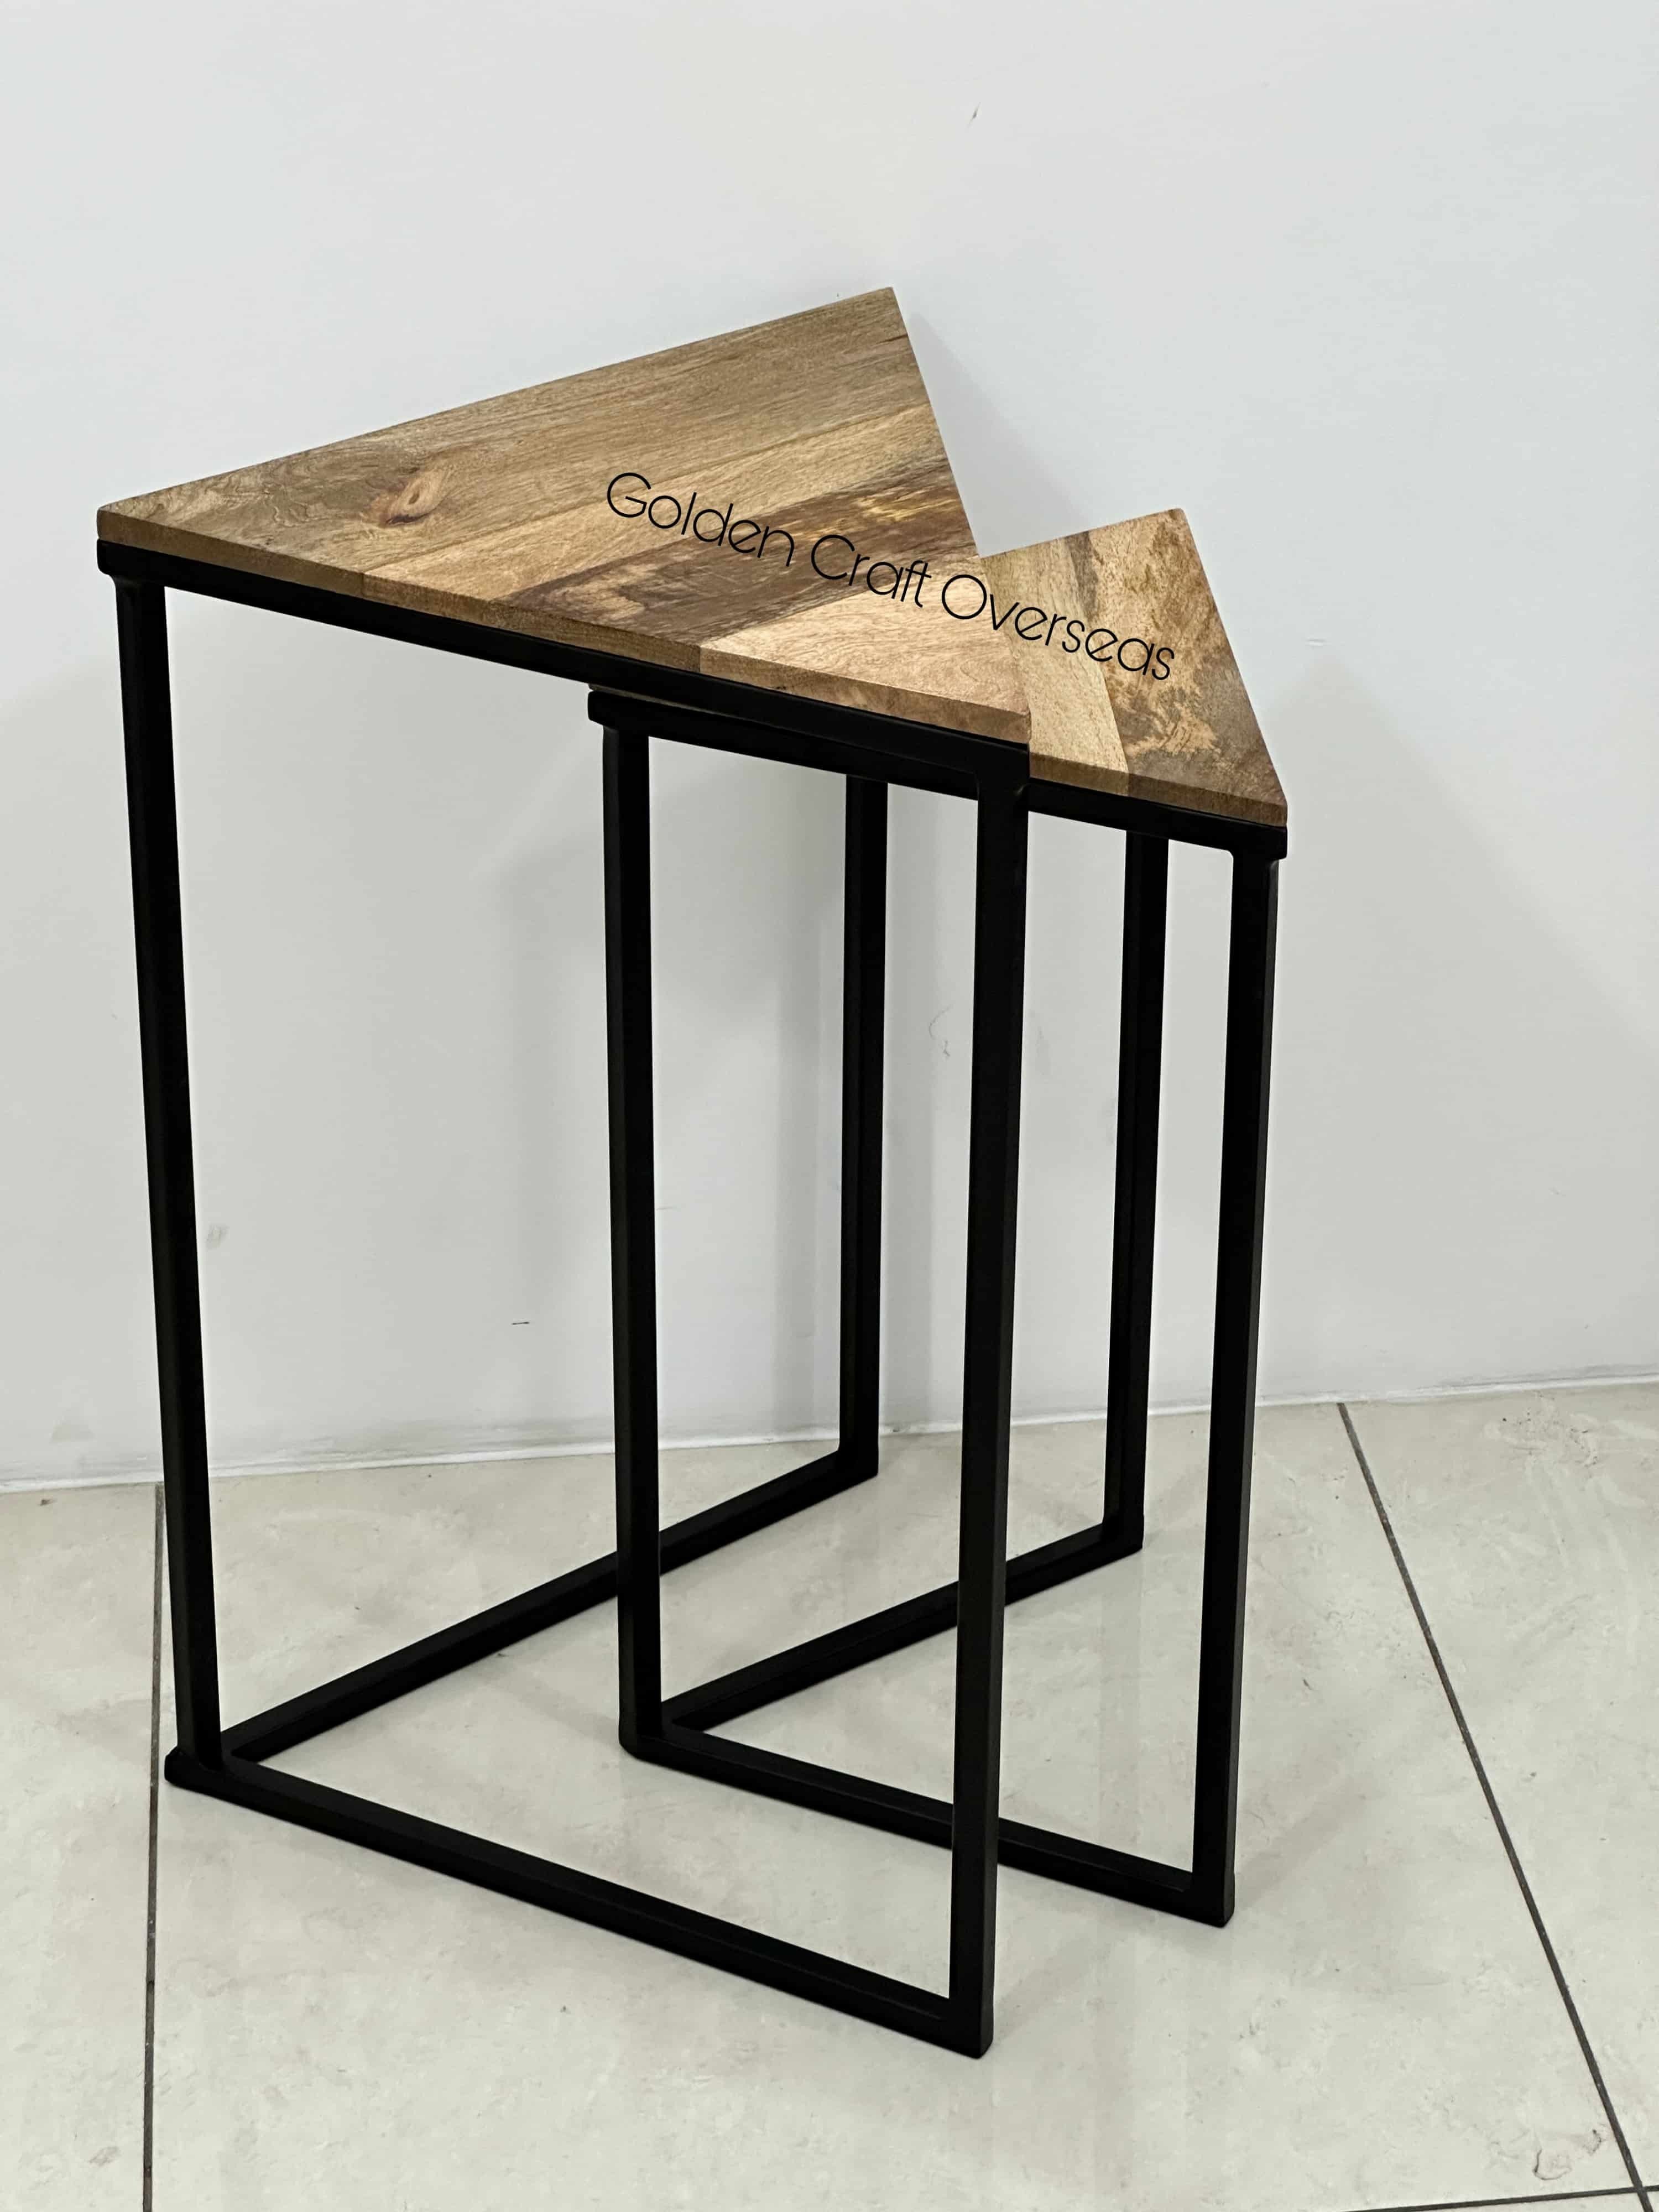 Affordable Nesting Table Set in MS with wooden top matte black powder coated frame